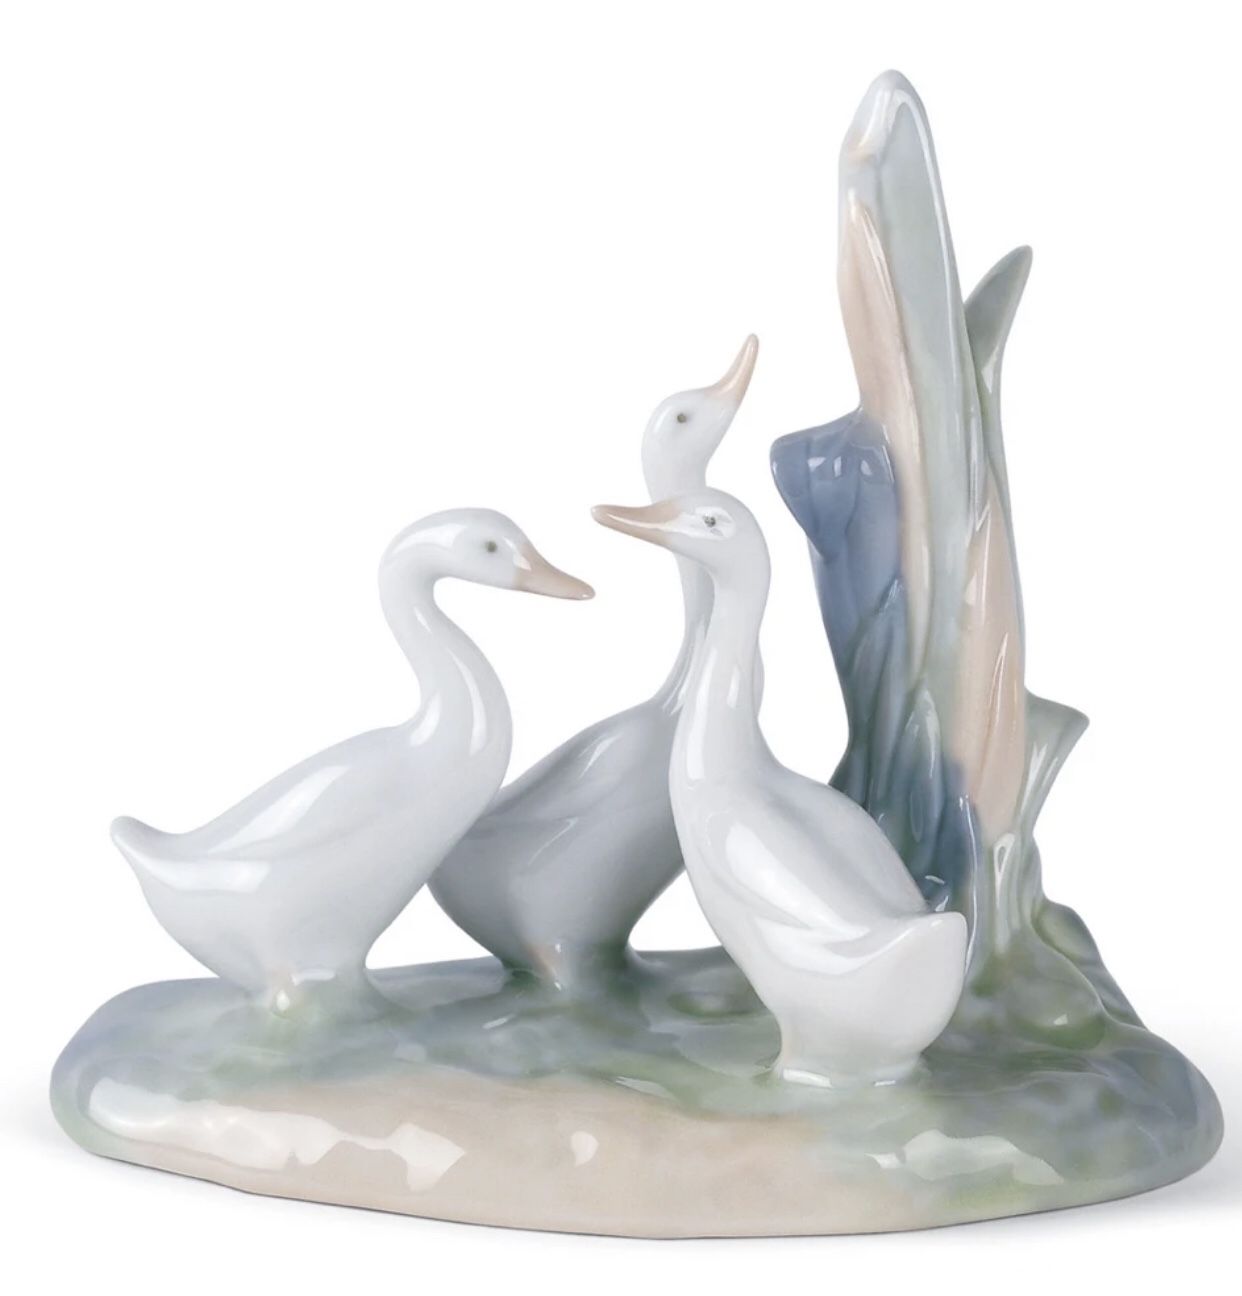 Nao by Lladro. Group of duck figurine